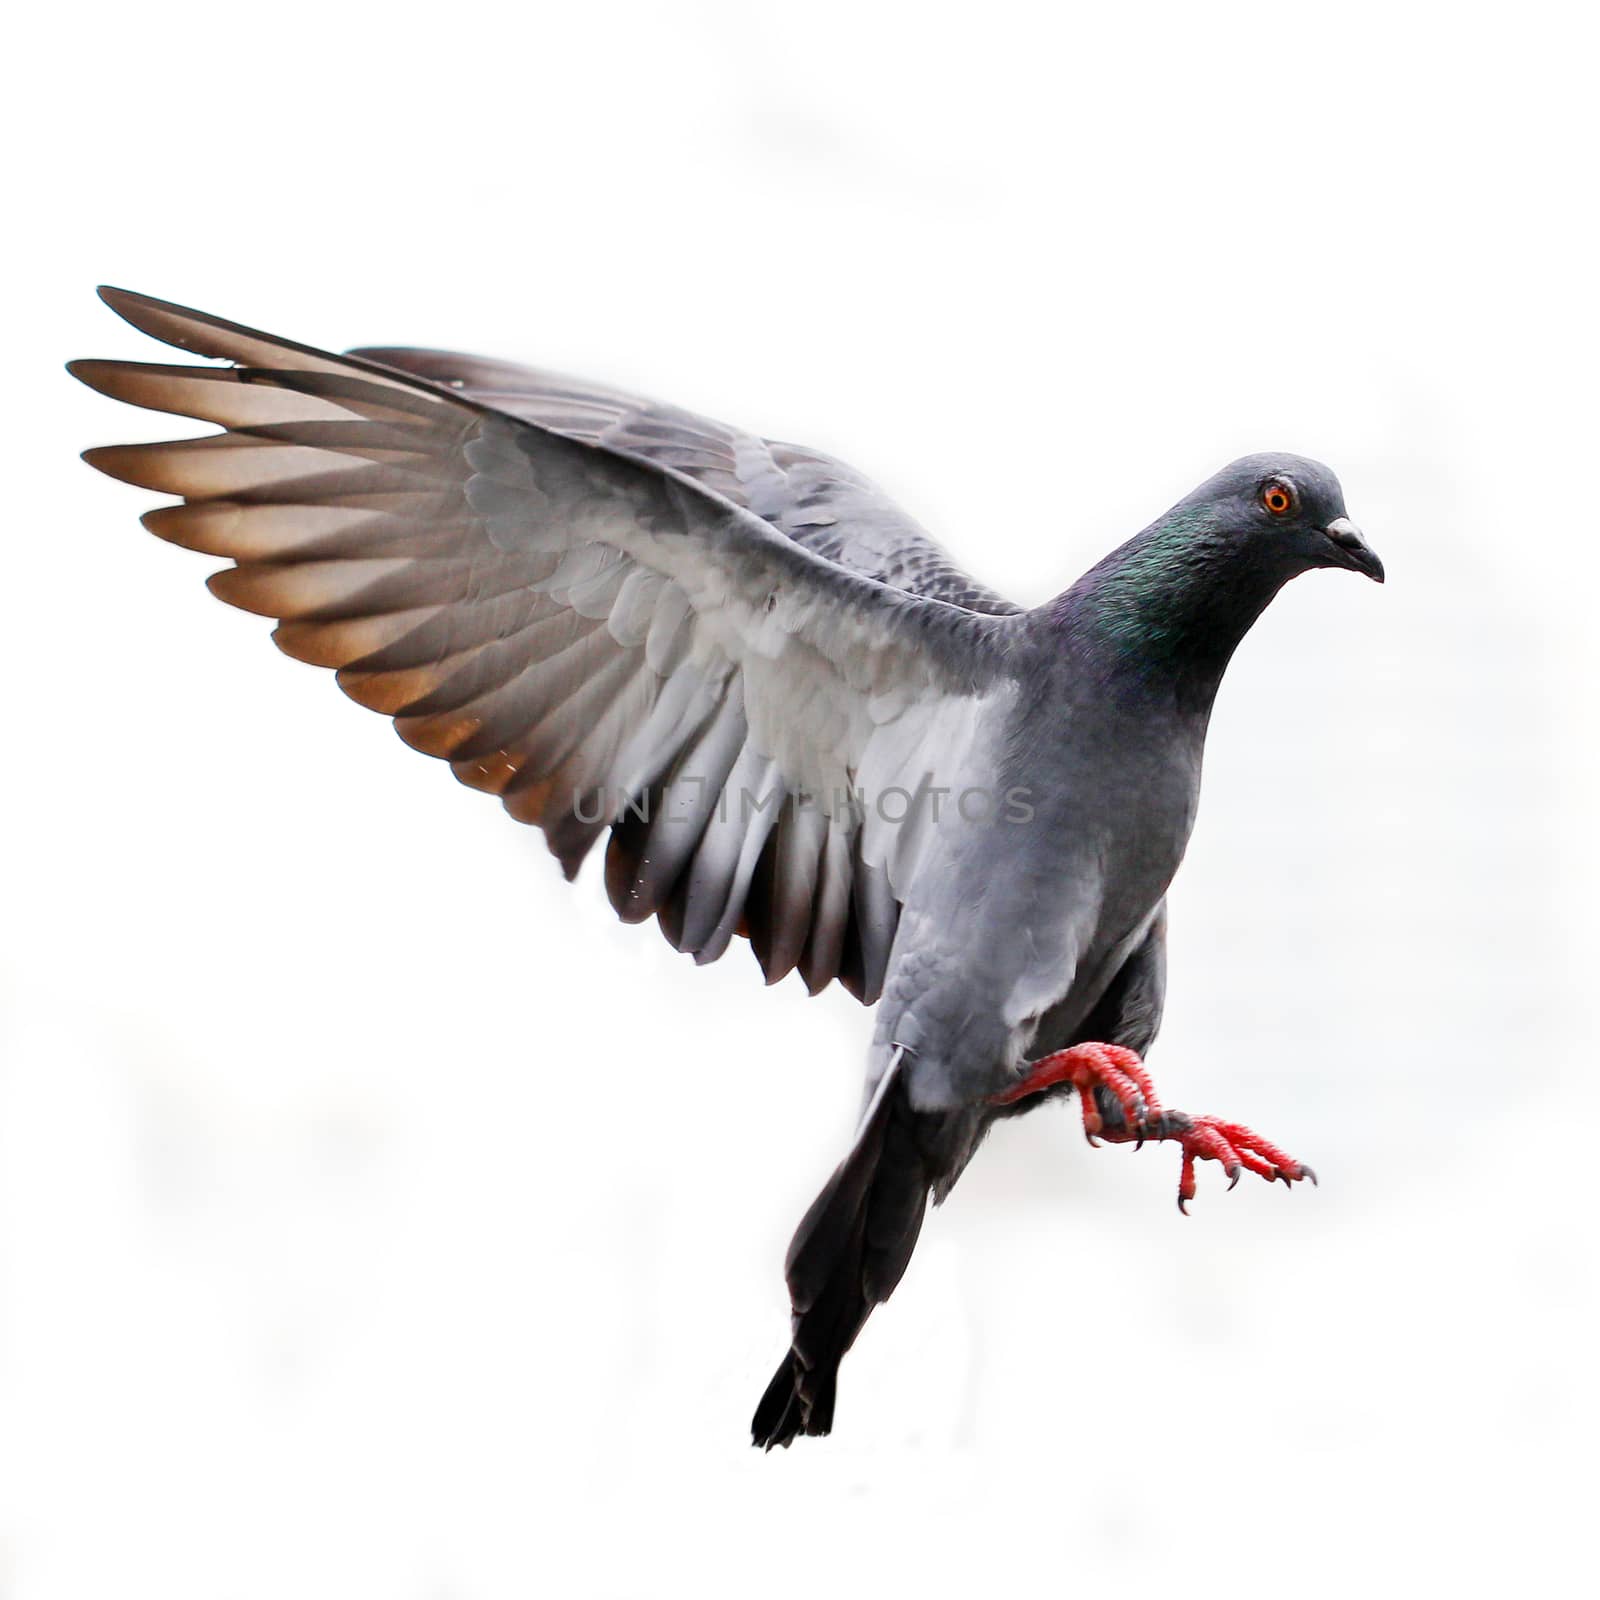 Flying pigeon isolated on white by leisuretime70